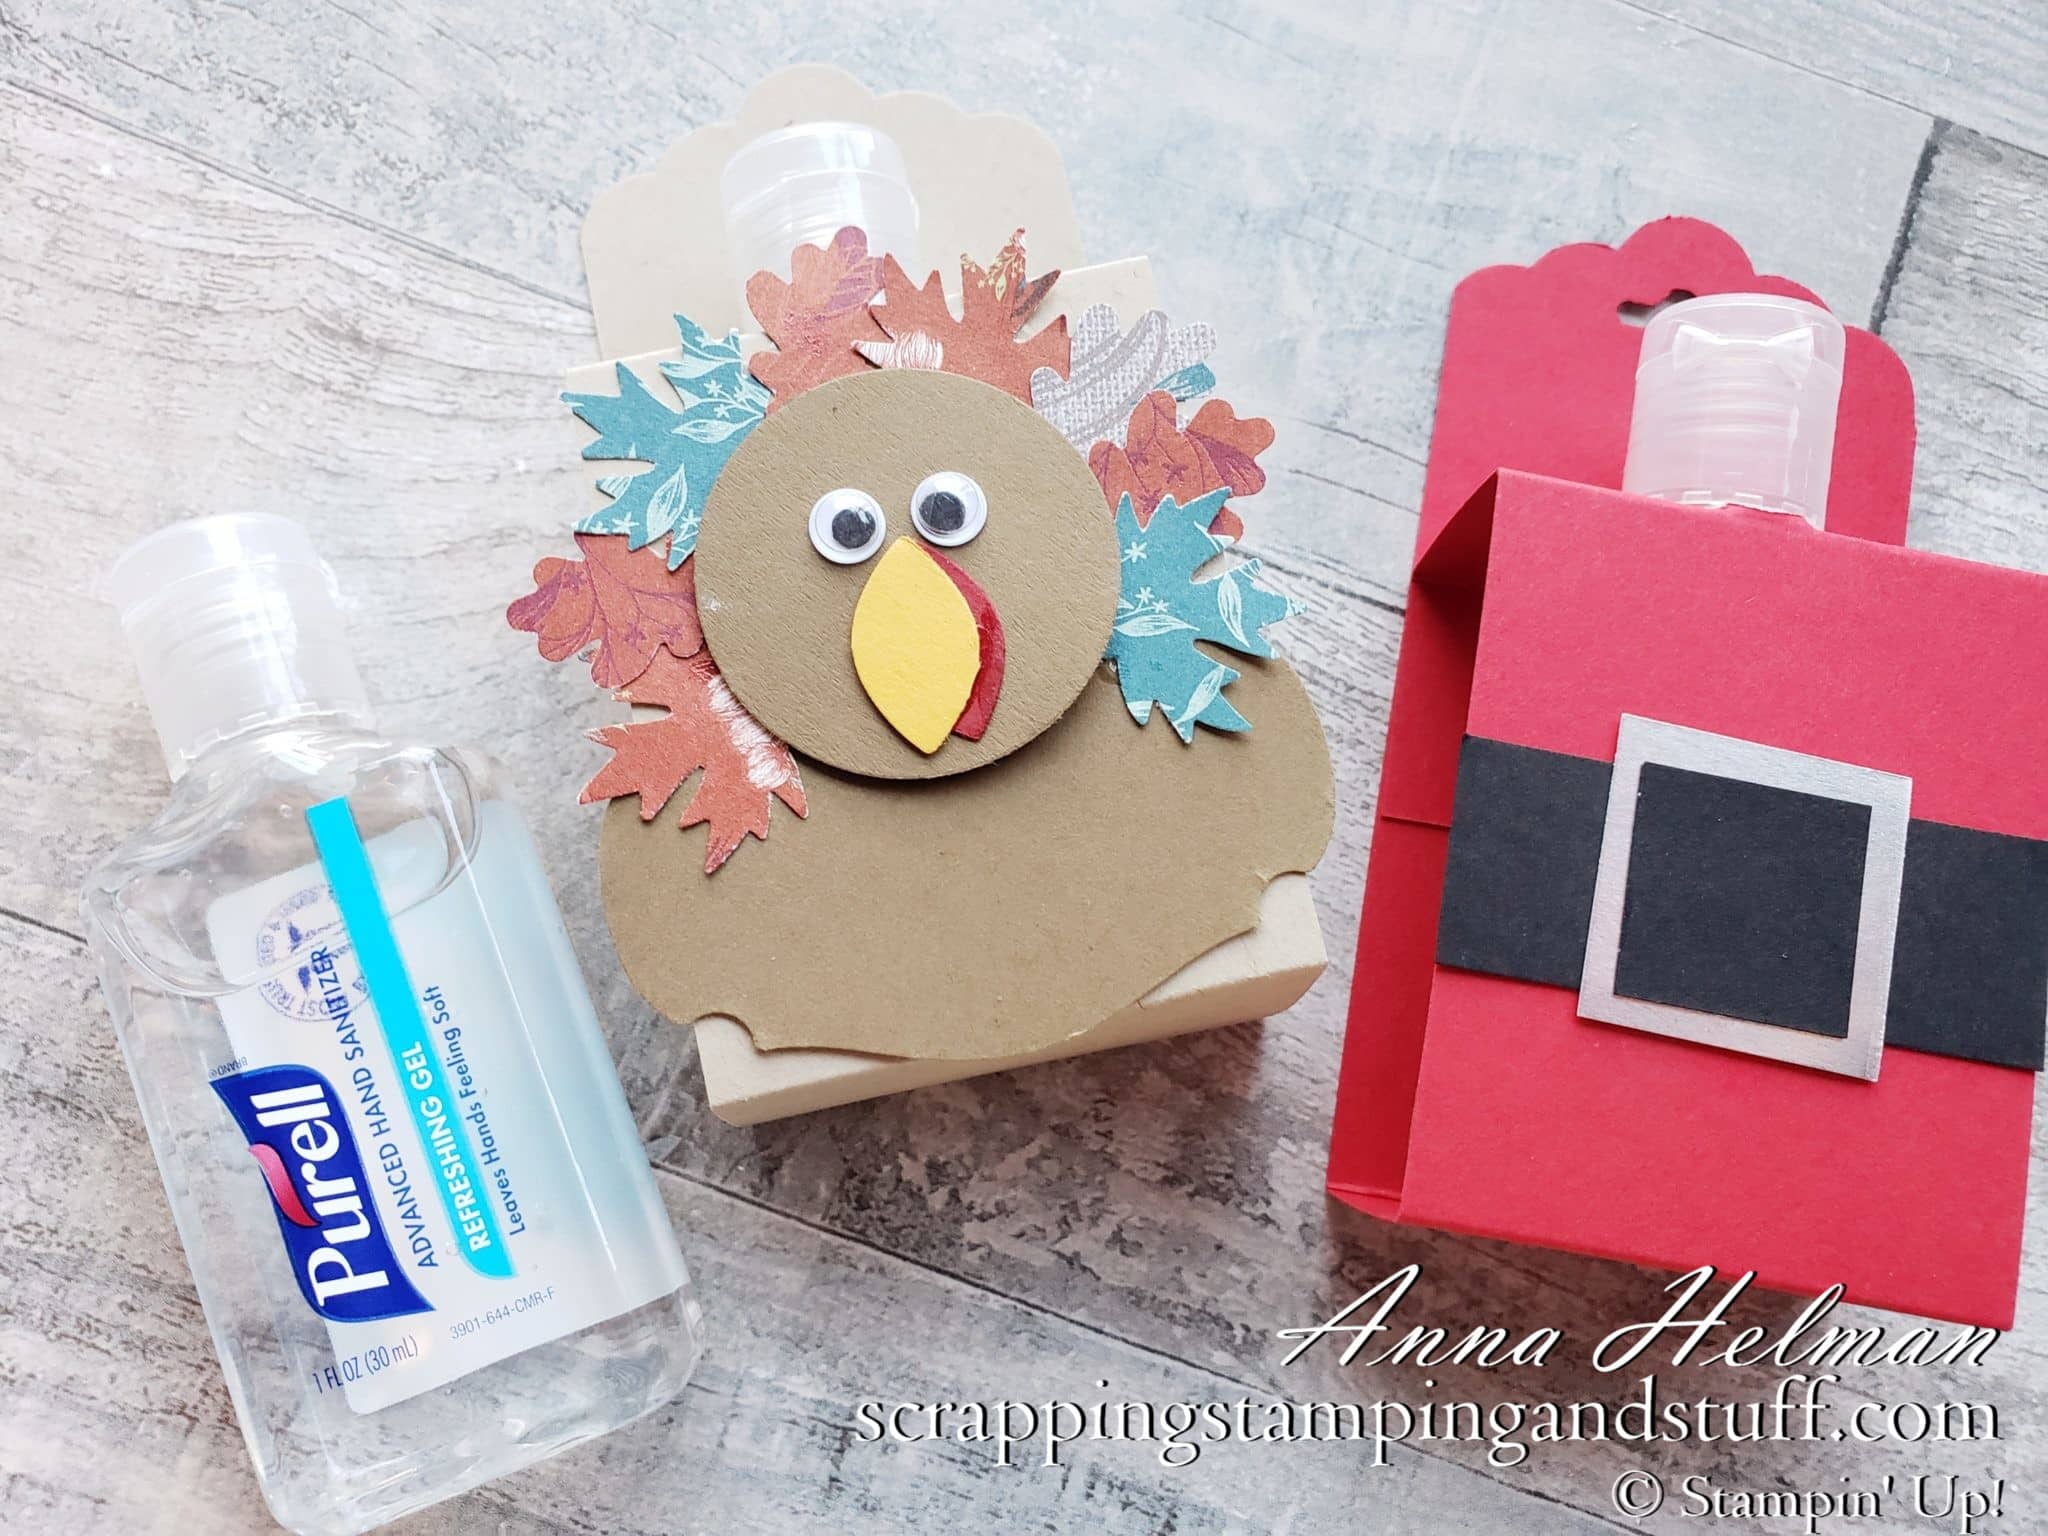 Decorated Hand Sanitizers – Day 5 of 12 Days of DIY Gift Ideas